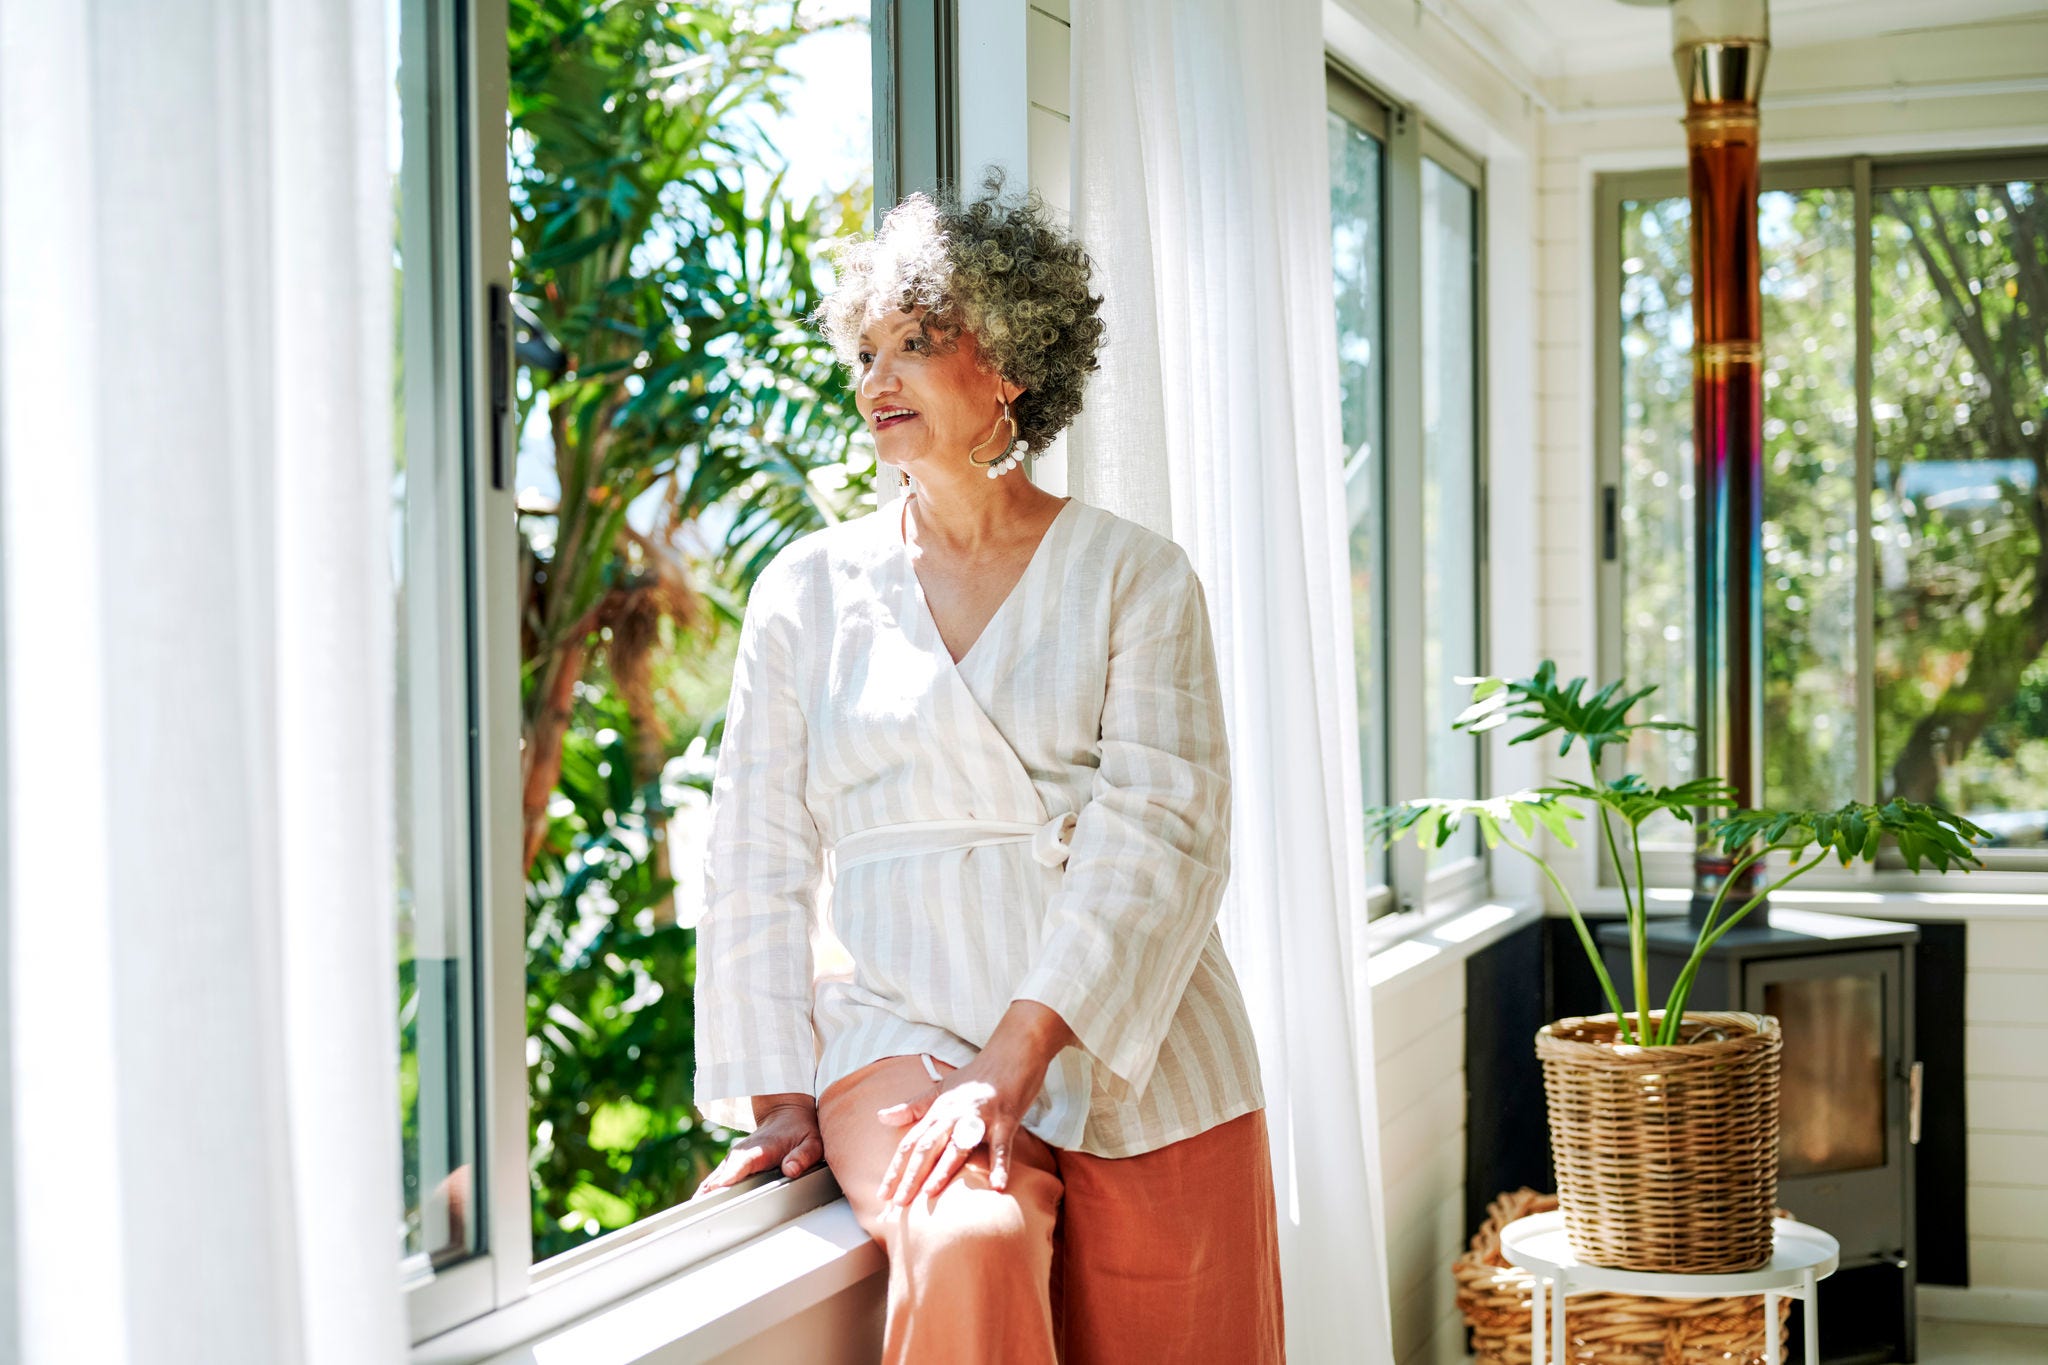 Smiling mature woman sitting on a window sill and looking out at the view while relaxing at home